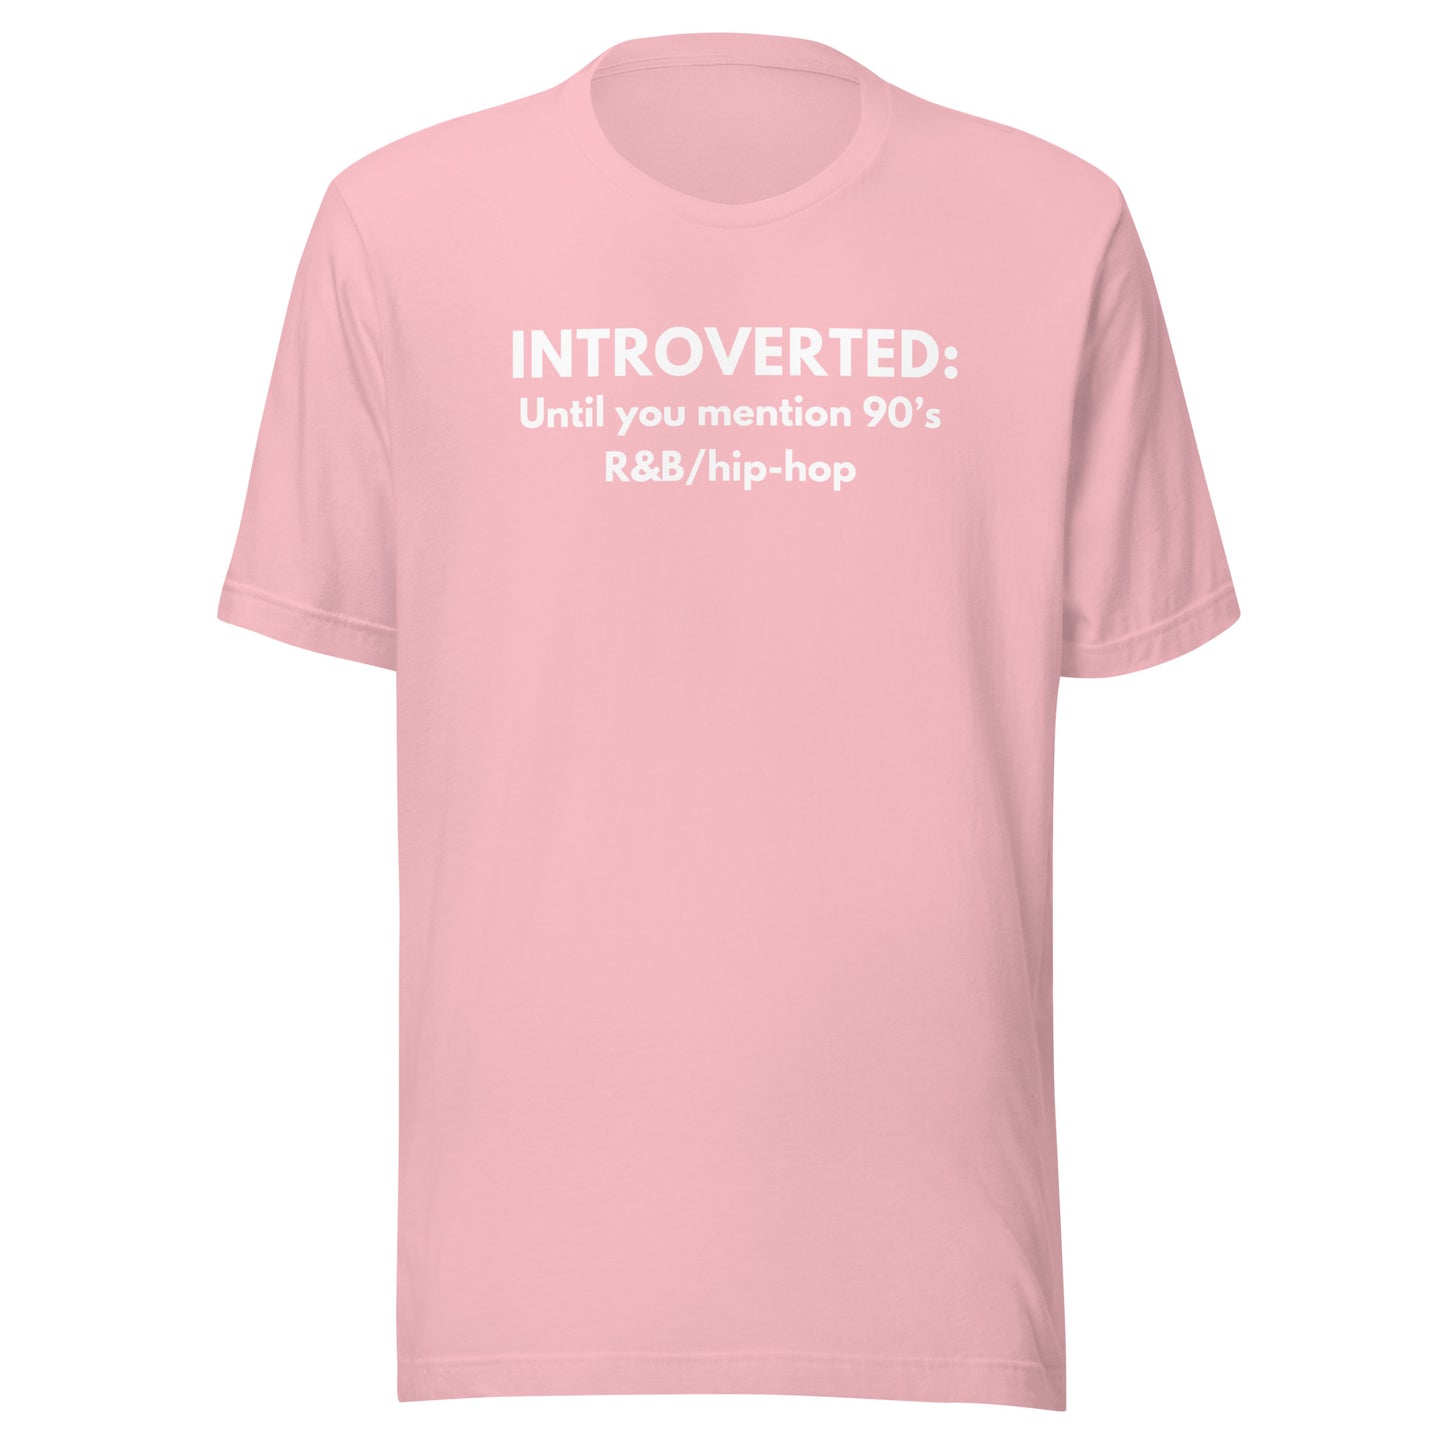 Introverted until you mention 90's R&B